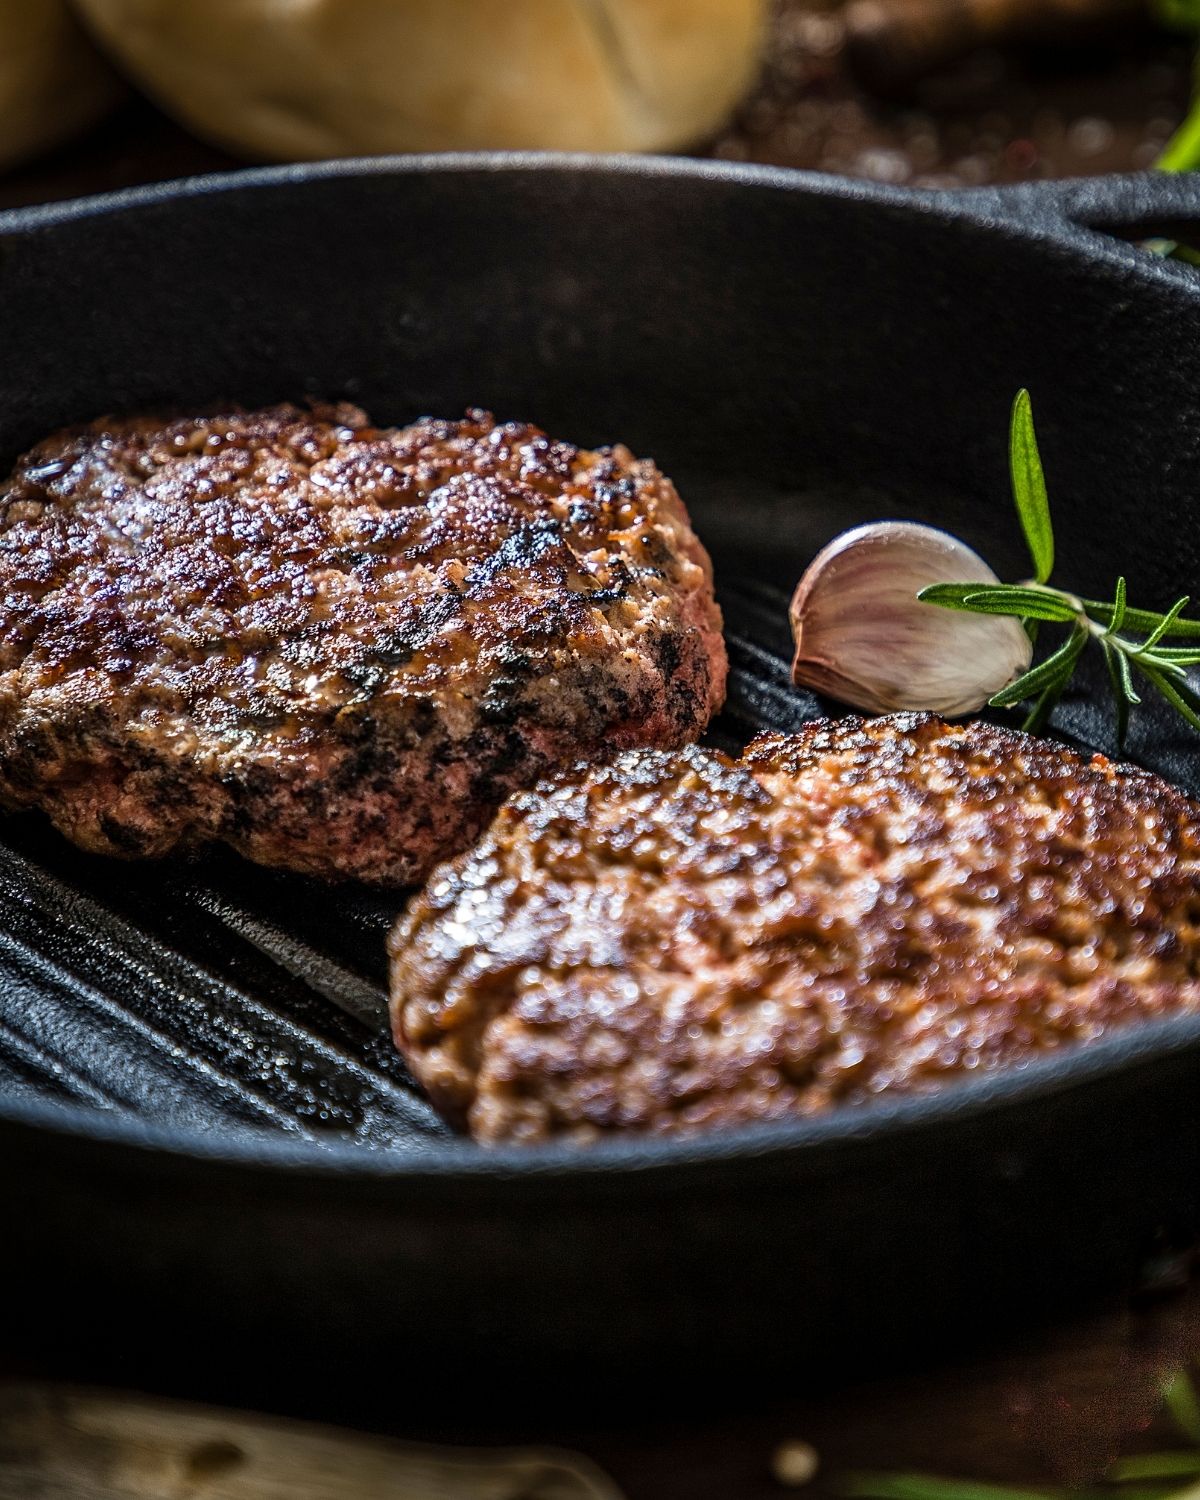 Burgers in a cast iron pan.